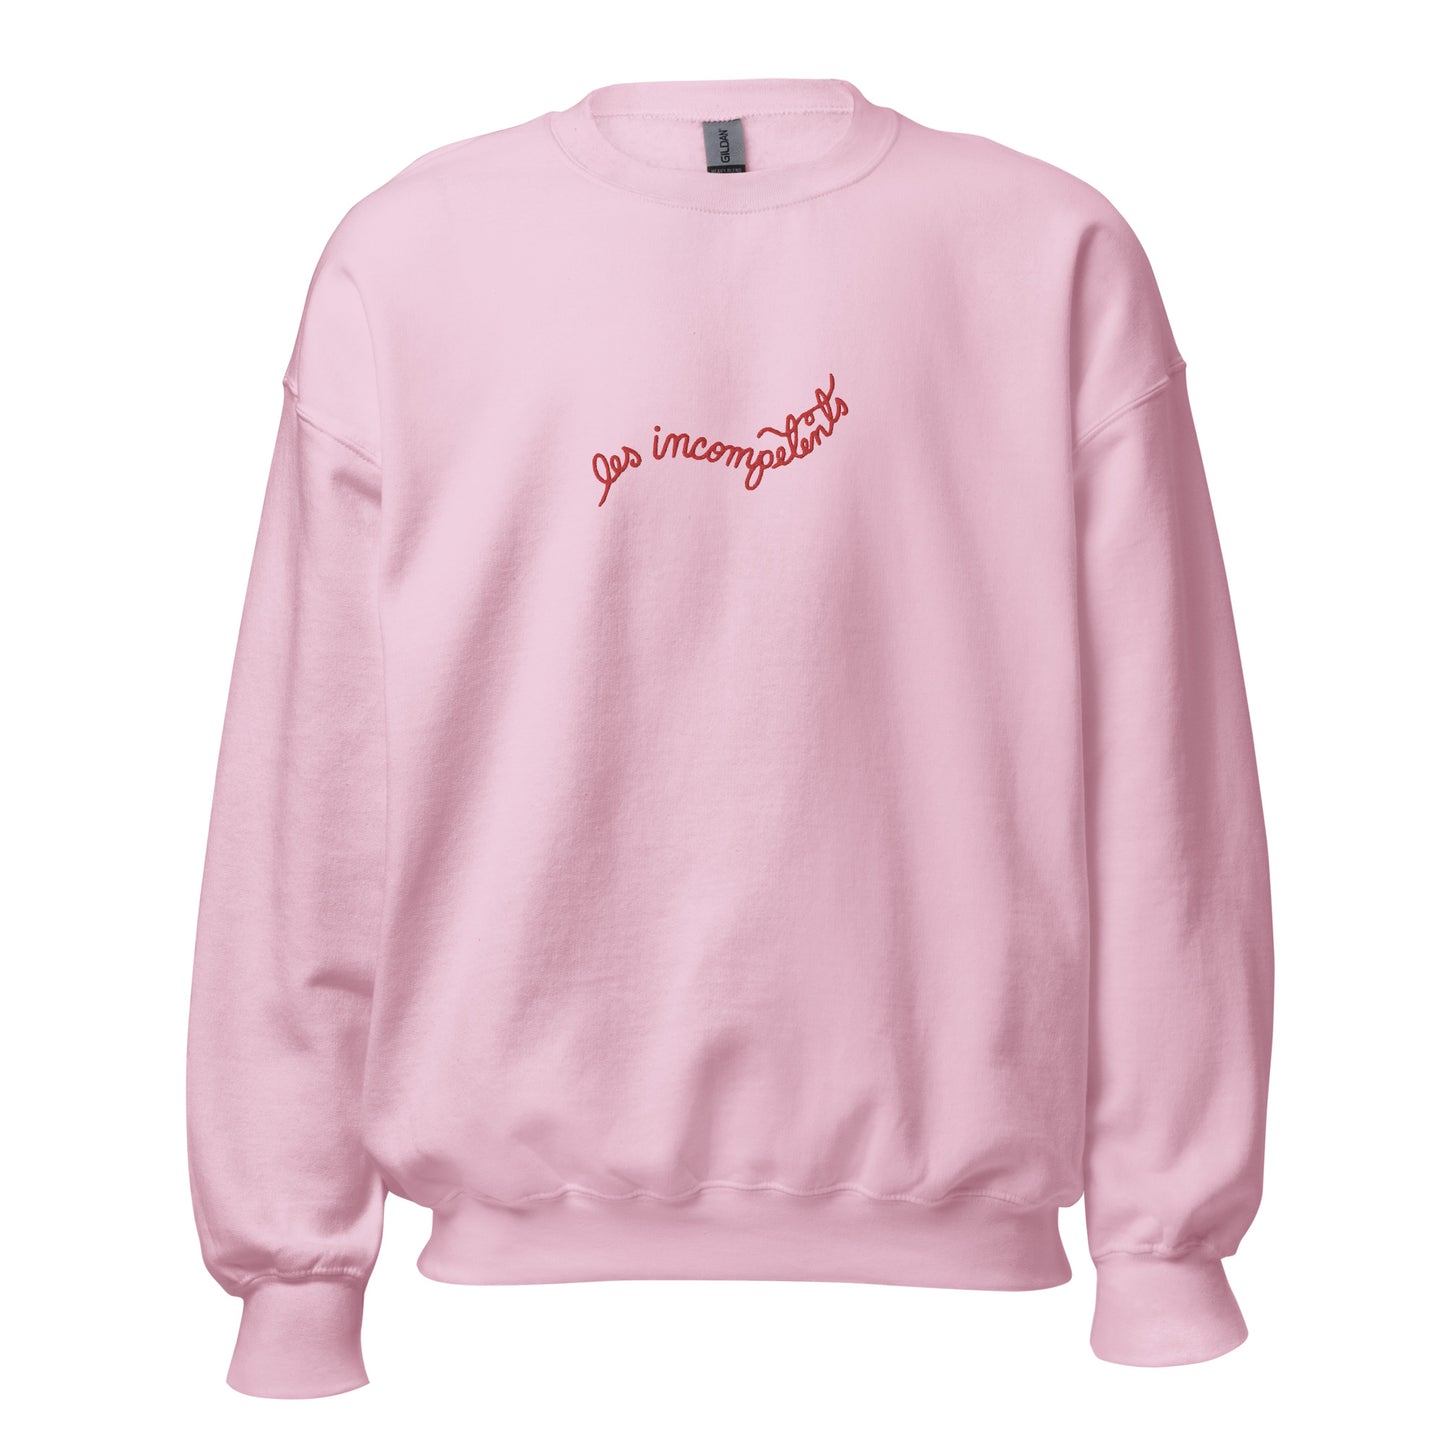 Les Incompetents Sweatshirt in Red Embroidery